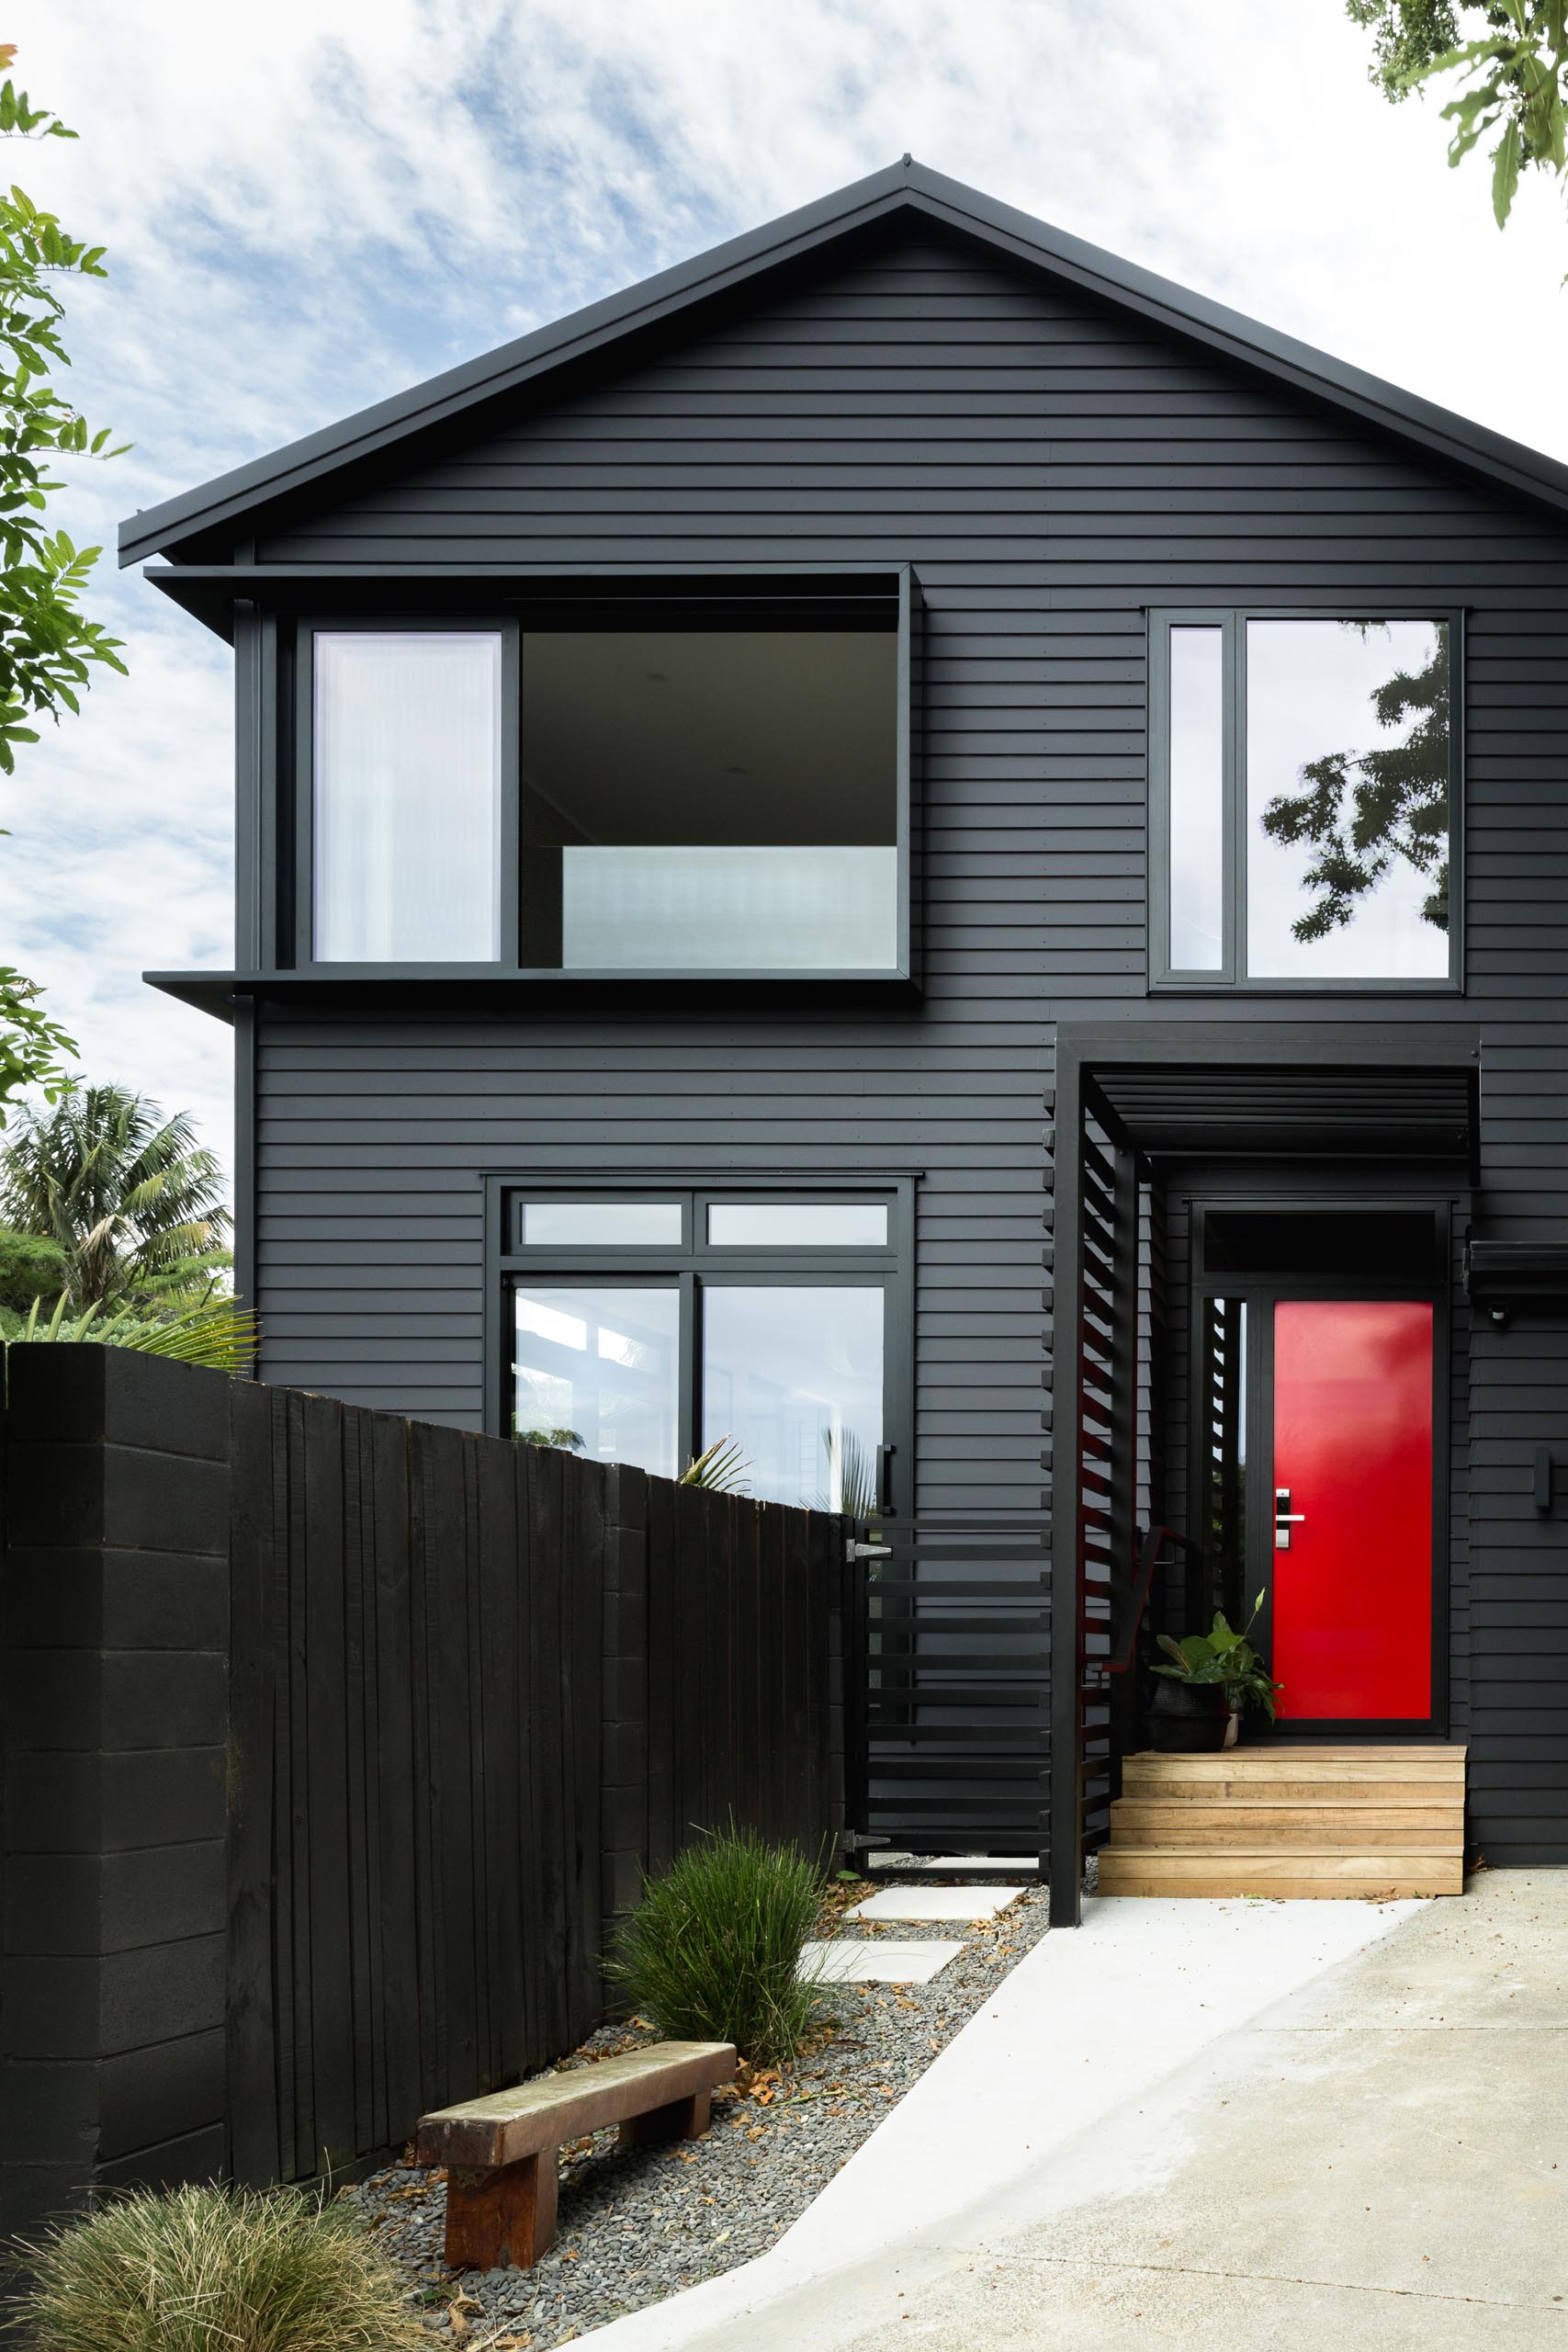 This modern house is in cedar weatherboards, and painted black creating a bold exterior, while the bright red door adds a strong contrasting design element.